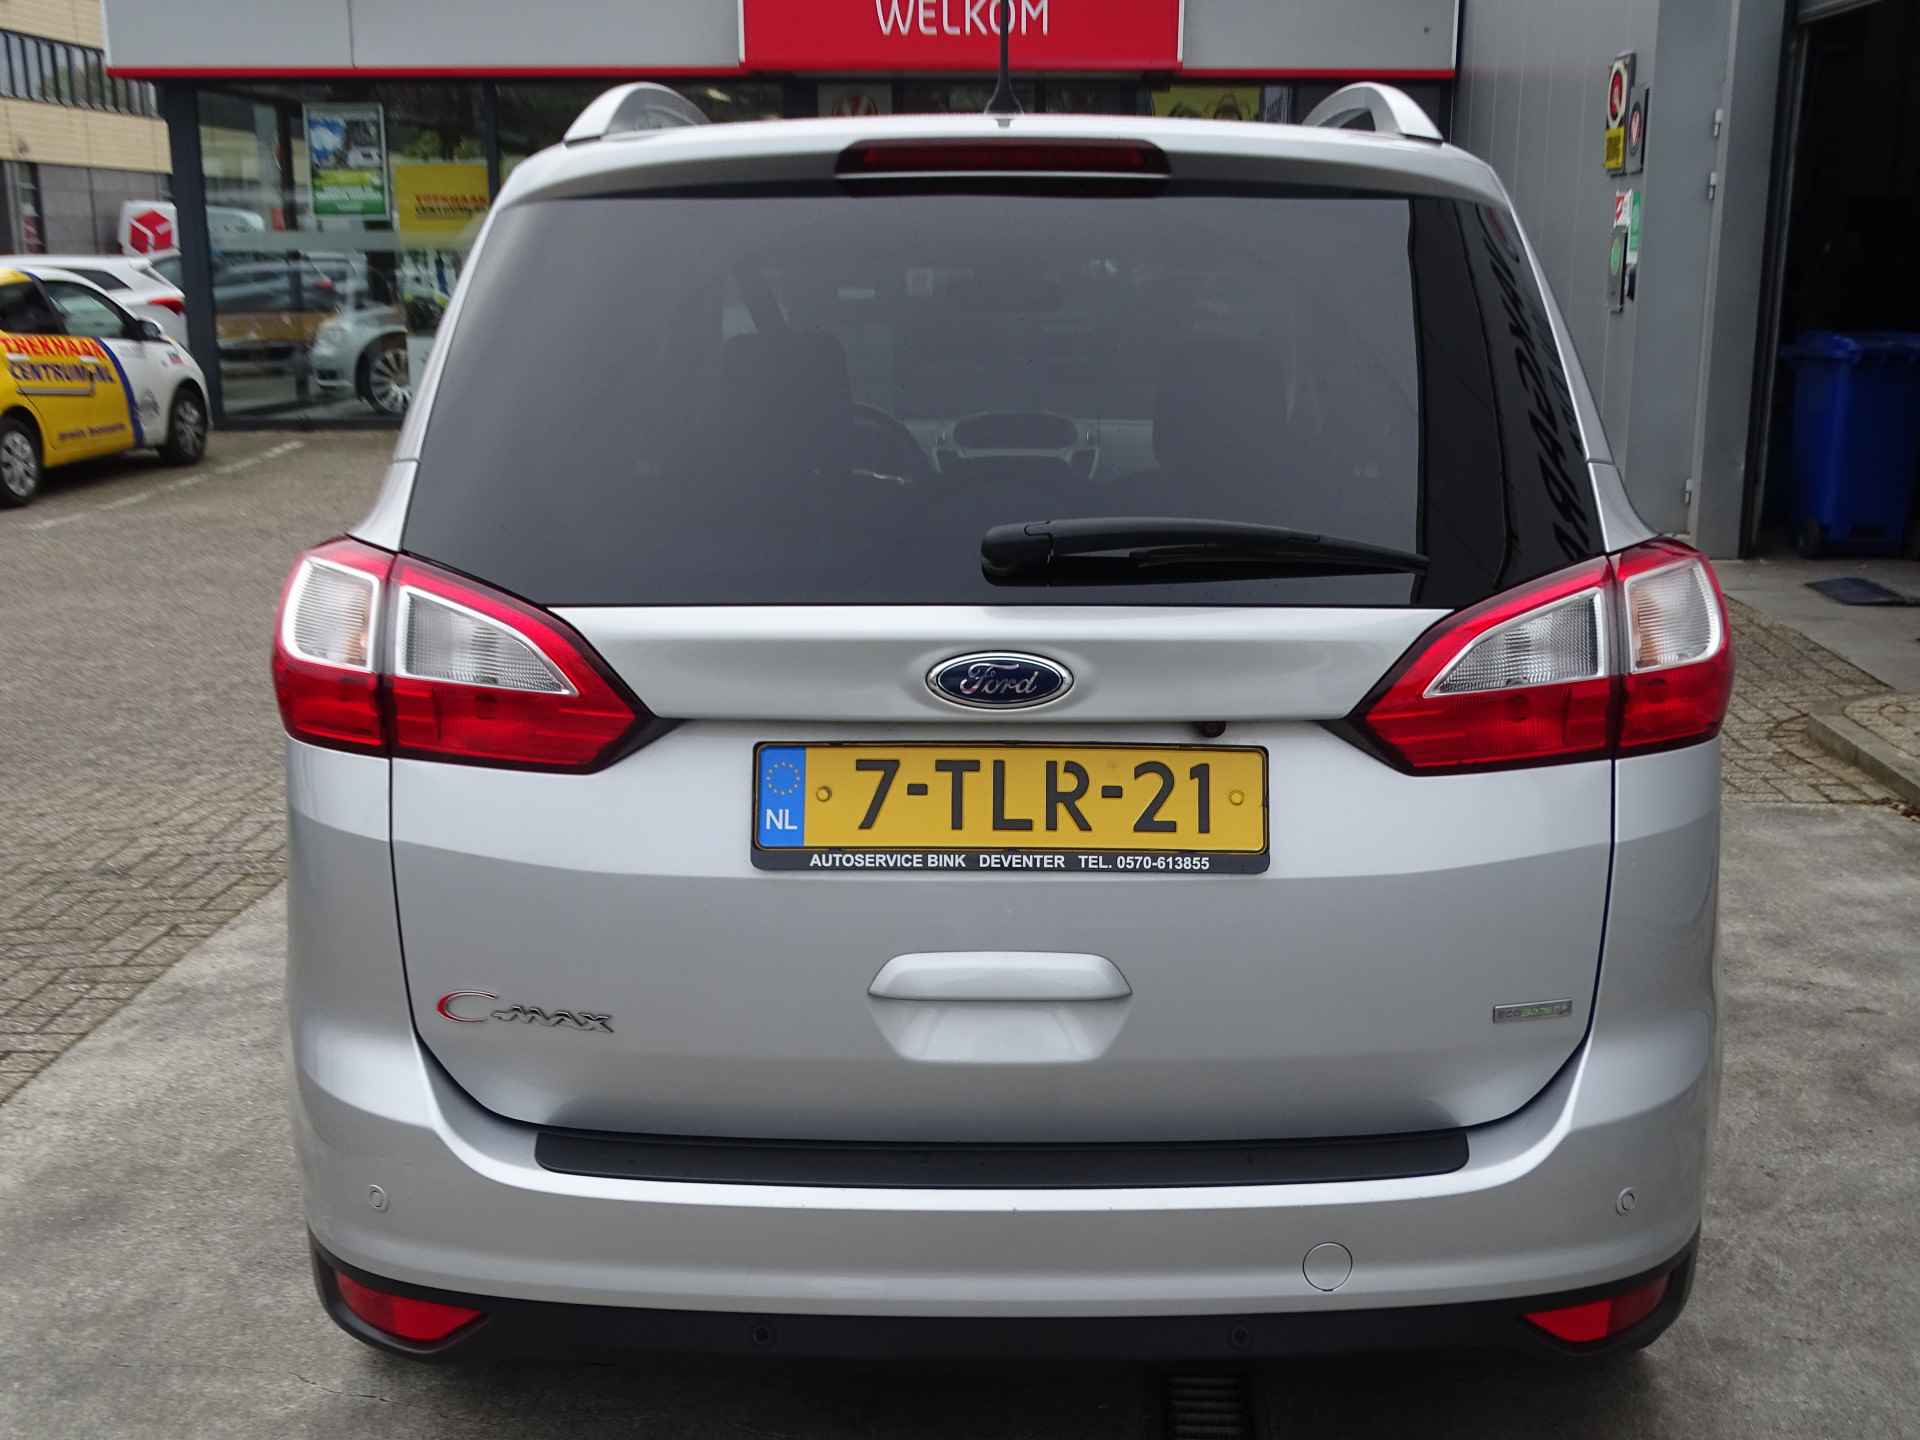 Ford Grand C-Max 1.0 Ed Plus 7 PERSOONS, Cruise Control, Camera, Compleet, NAP! - 15/70